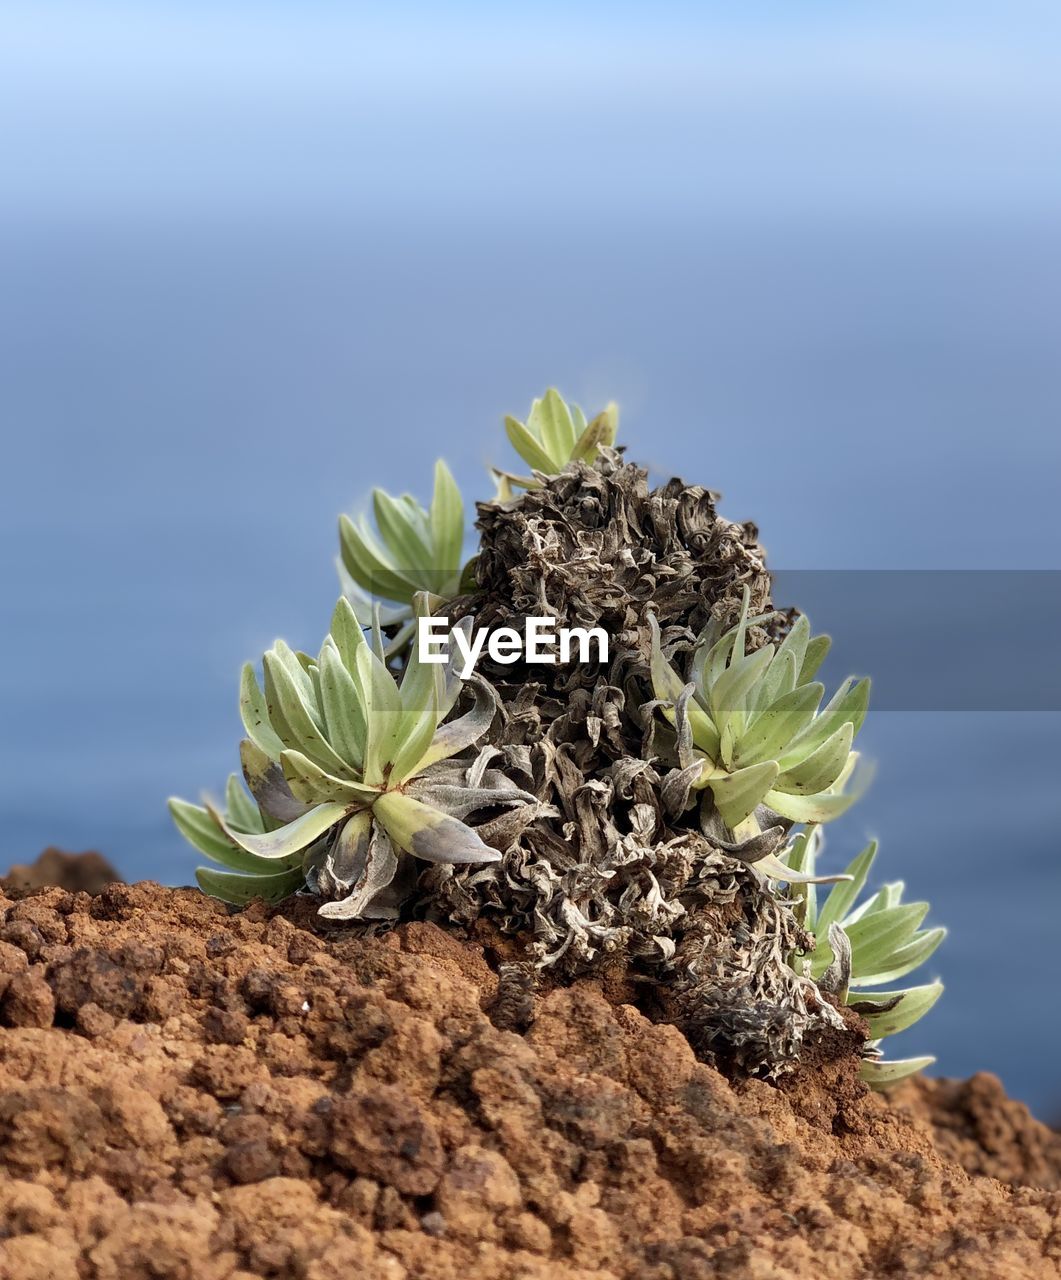 soil, plant, nature, growth, no people, beauty in nature, flower, leaf, plant part, land, day, water, outdoors, macro photography, green, seedling, beginnings, dirt, freshness, close-up, environment, succulent plant, food, food and drink, sea, sky, focus on foreground, botany, cactus, produce, tranquility